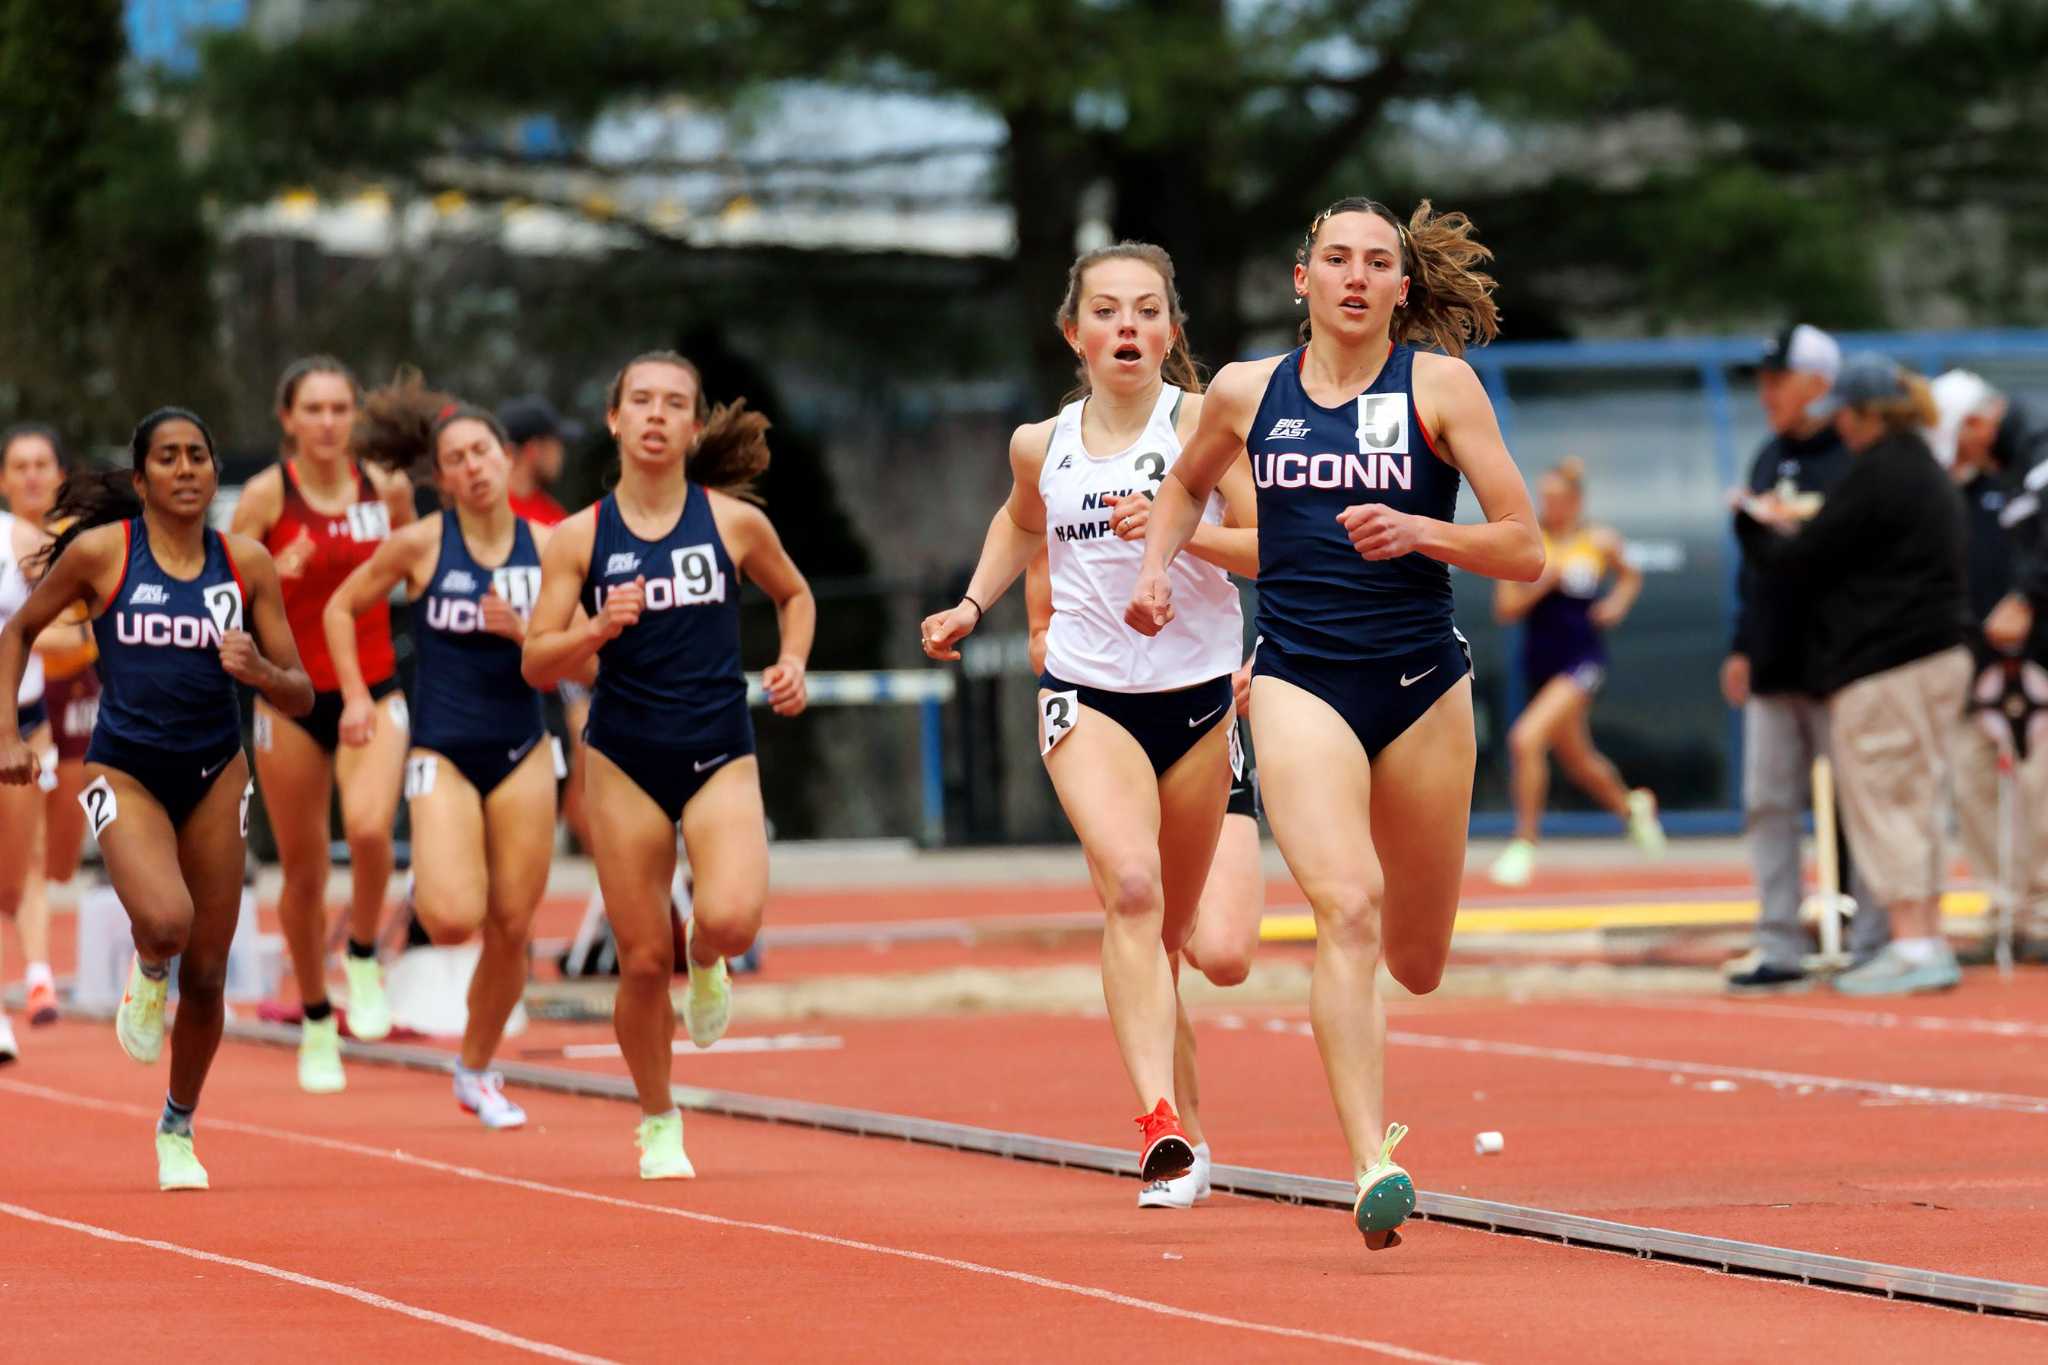 Connecticut natives leading UConn into the Big East Track and Field